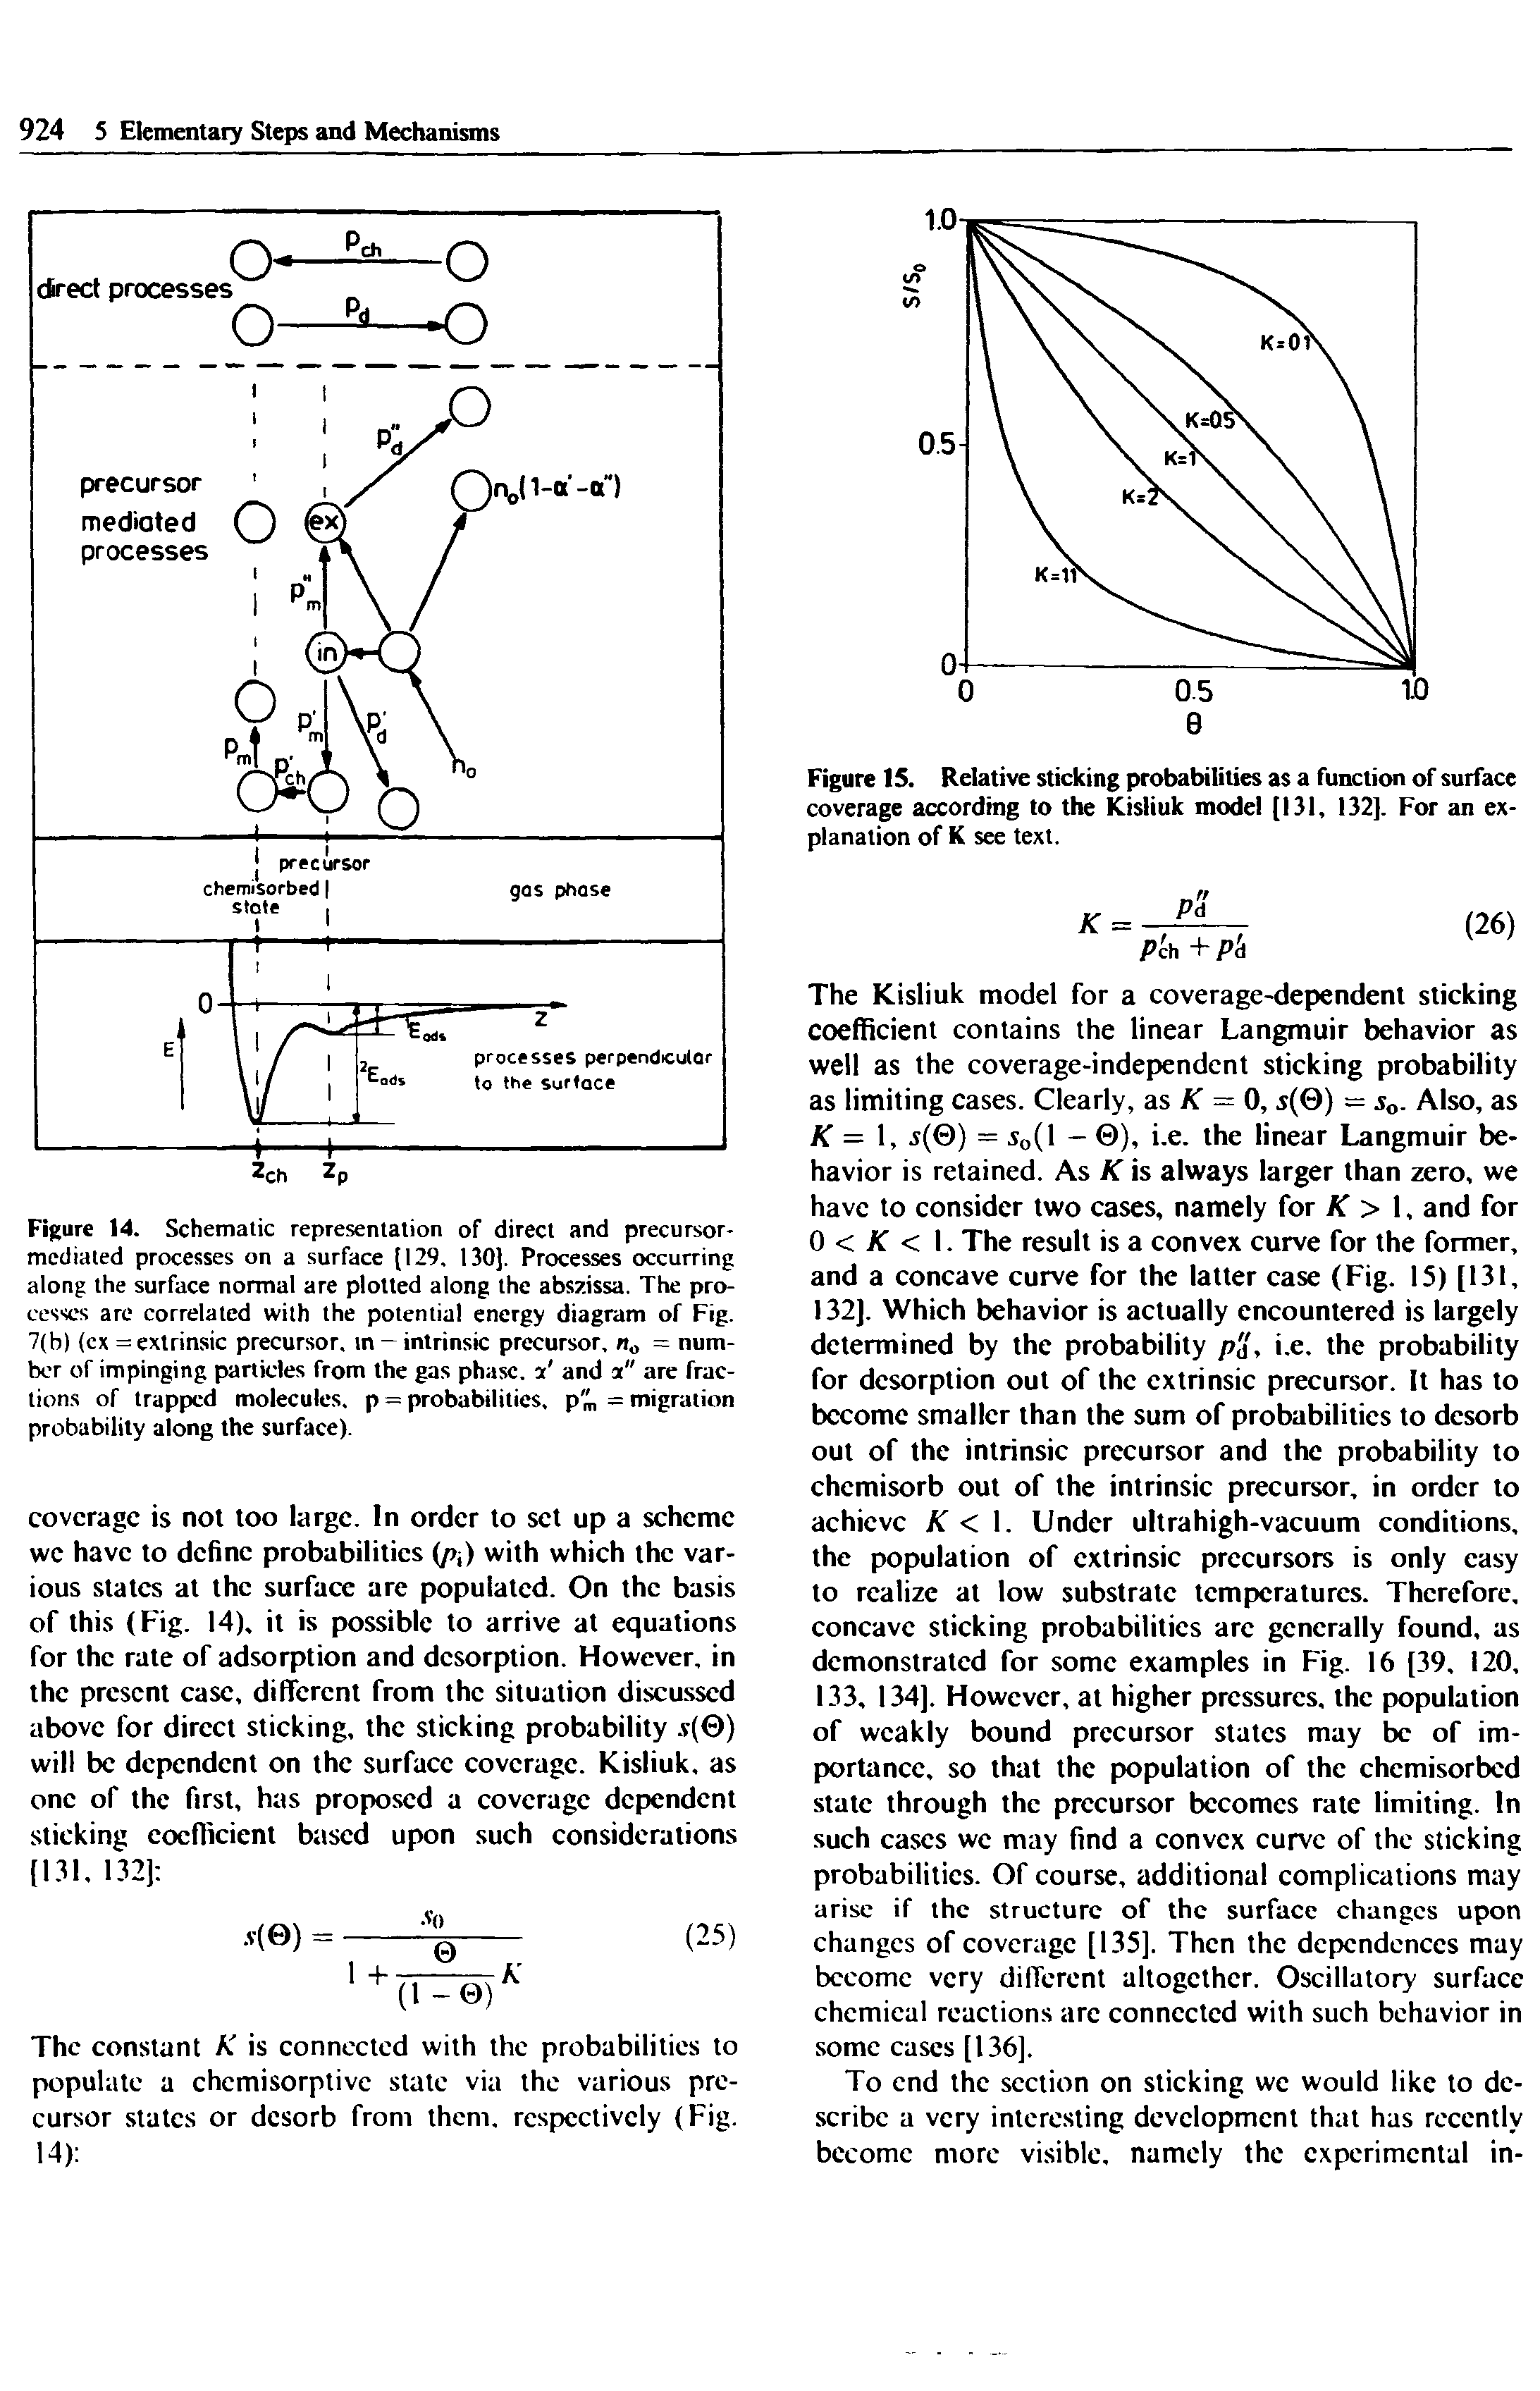 Figure 14. Schematic representation of direct and precursor-mediated processes on a surface [129, 130]. Processes occurring along the surface normal are plotted along the abszissa. The processes are correlated with the potential energy diagram of Fig. 7(b) (ex = extrinsic precursor, in —intrinsic precursor, nc = number of impinging particles from the gas phase, a and a" are fractions of trapped molecules, p = probabilities. p"m = migration probability along the surface).